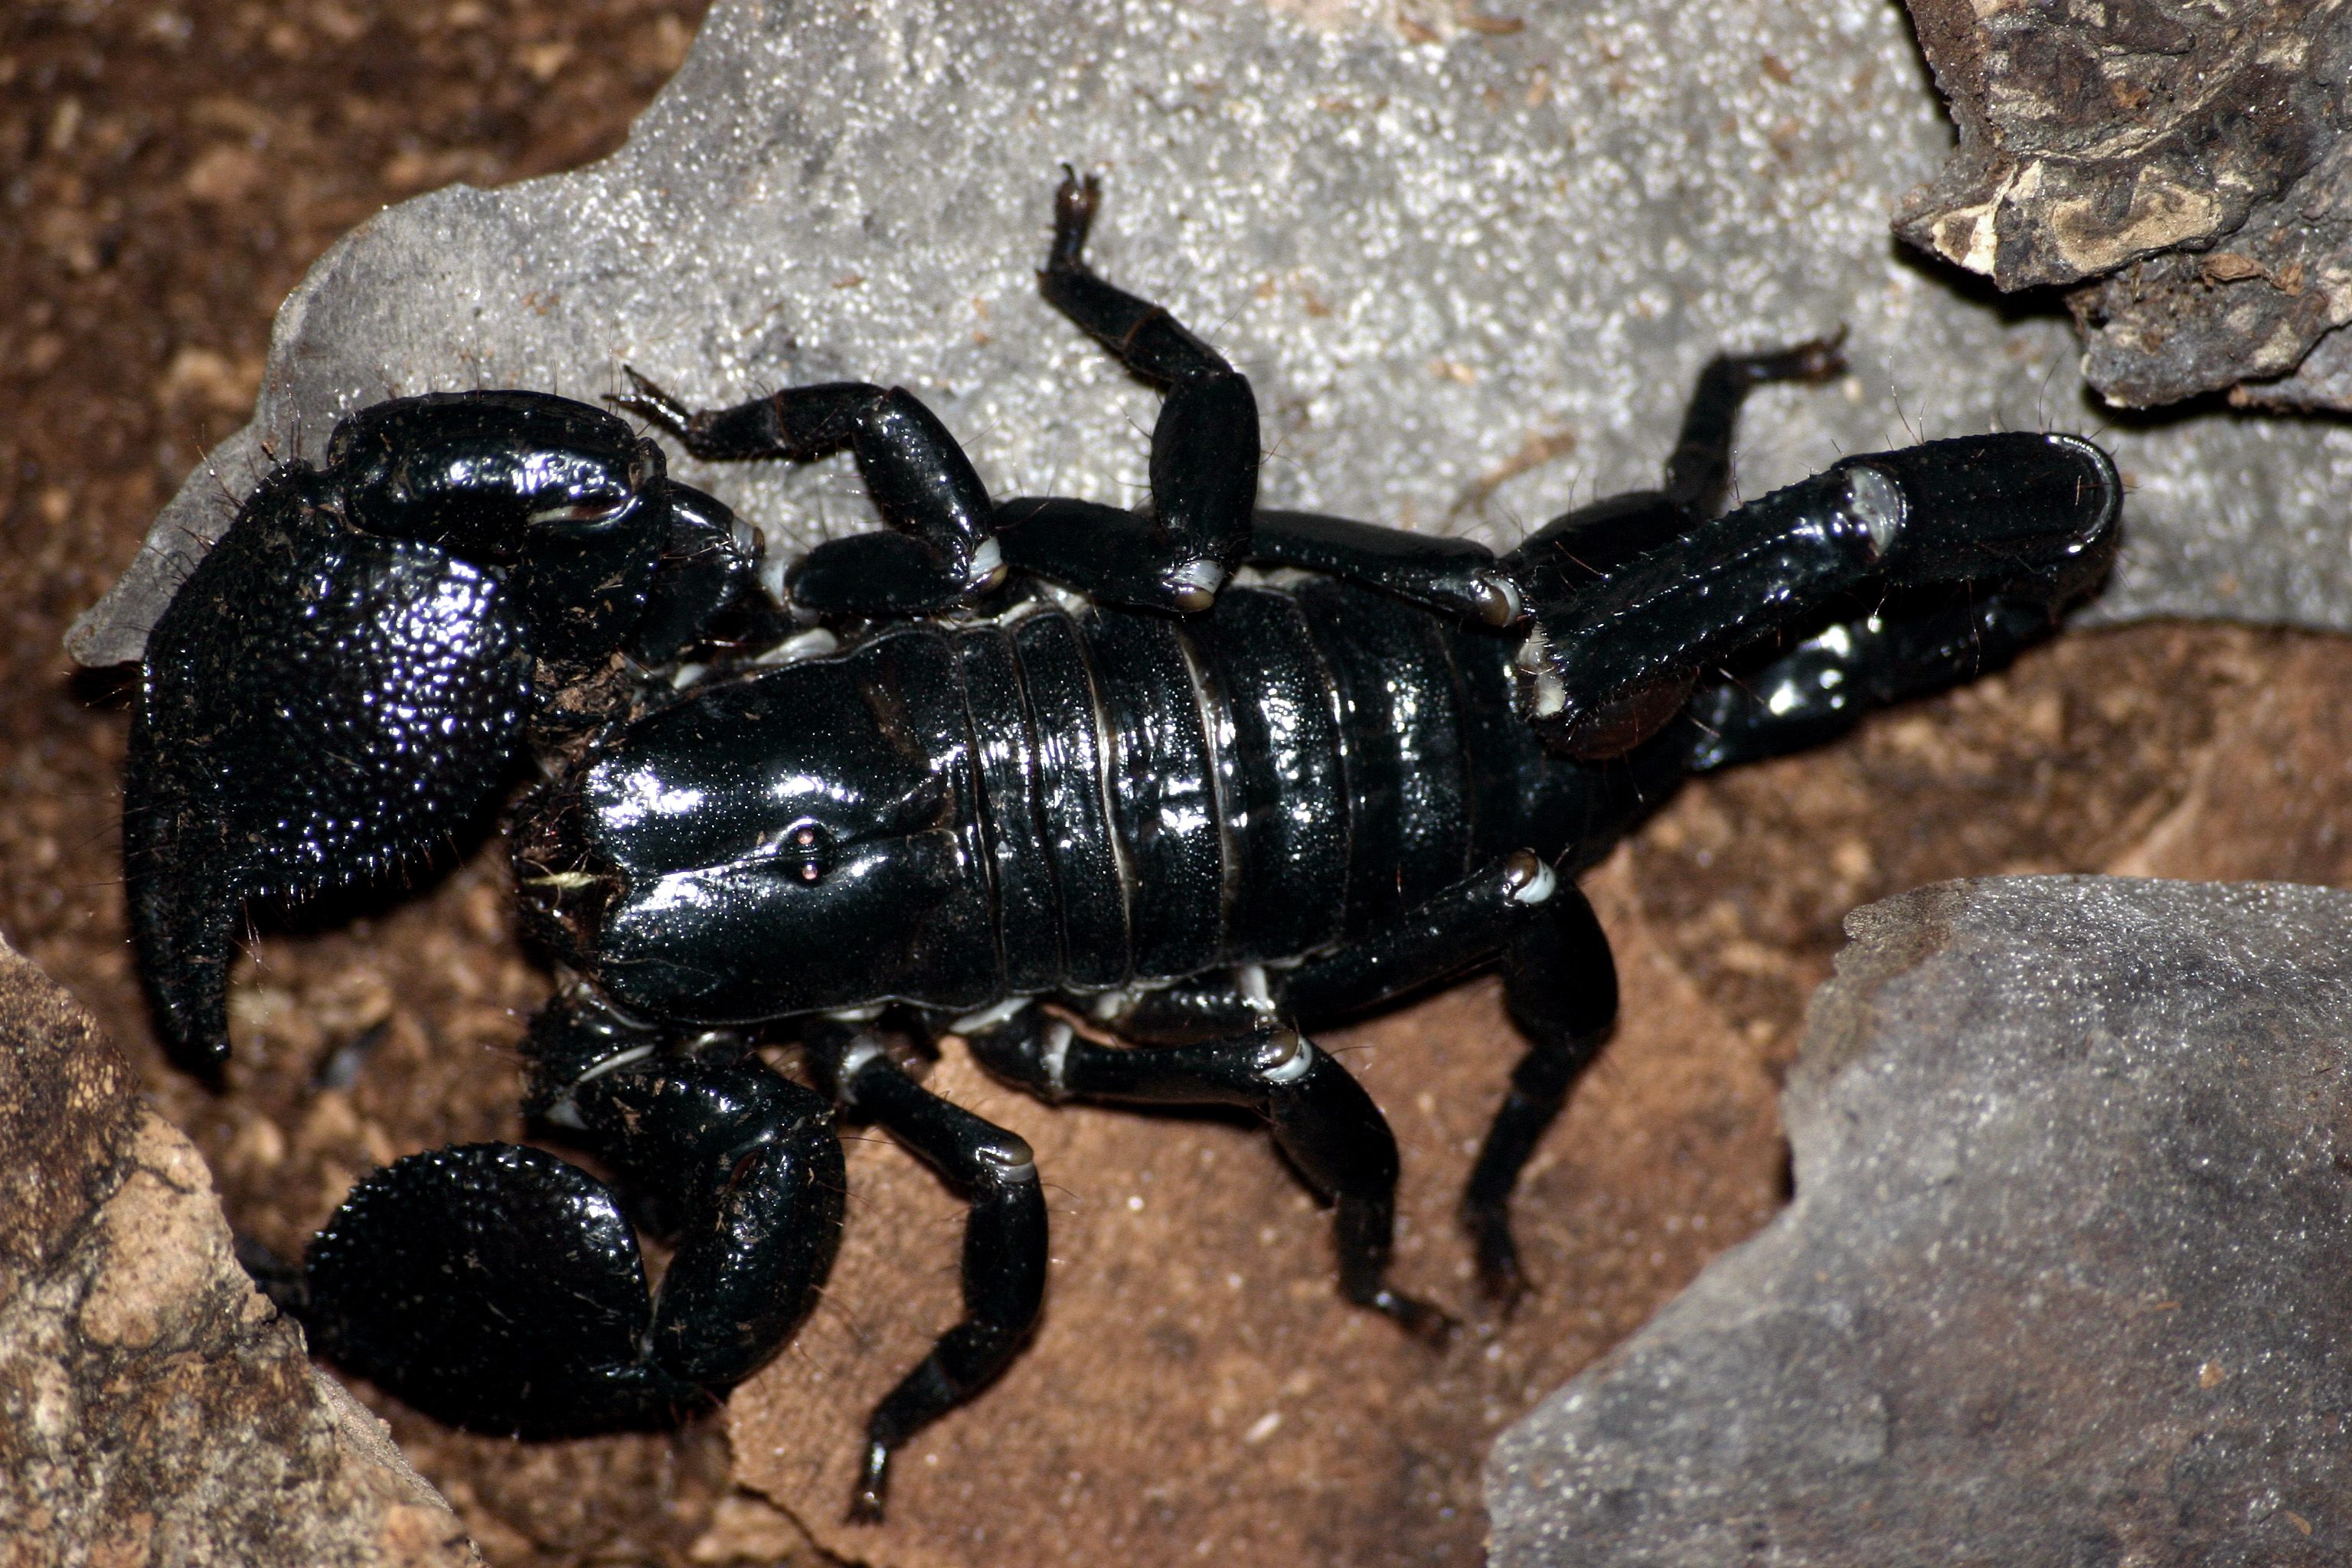 Naturally Deter Scorpions | Scorpion, Insects and Animal